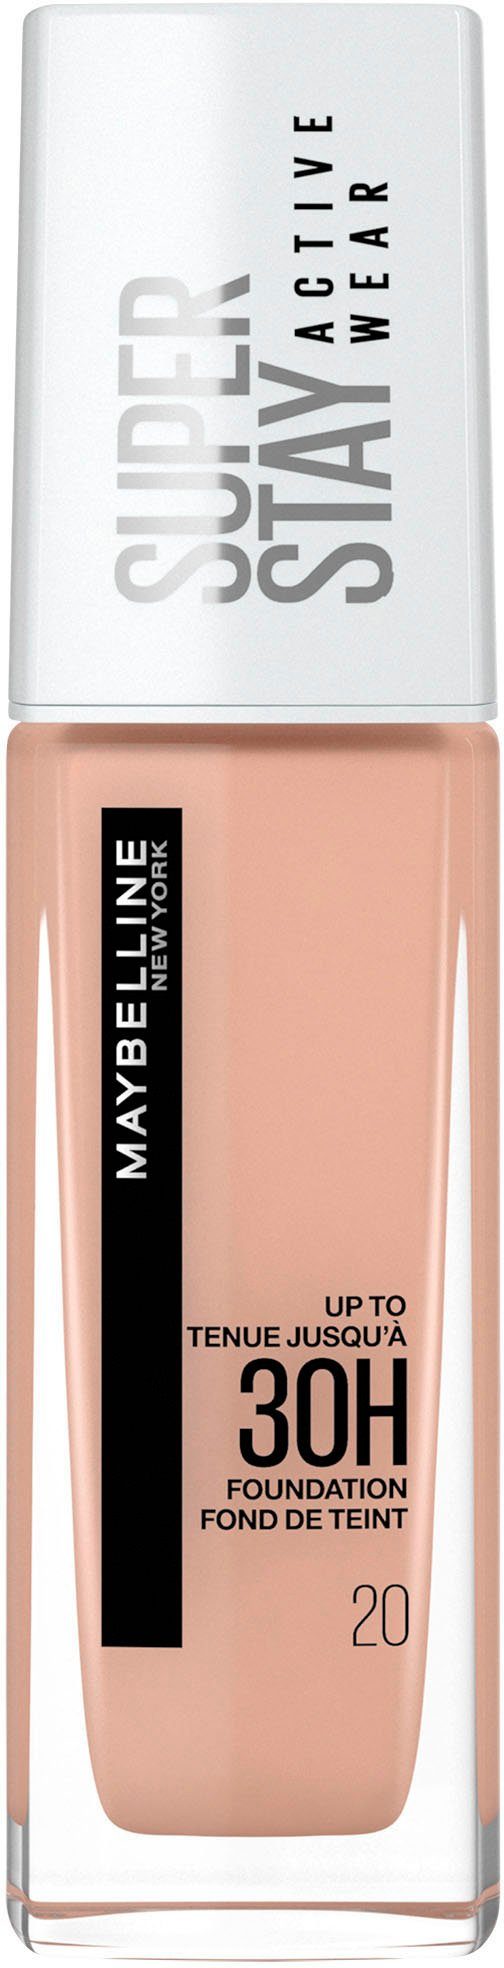 Foundation Wear YORK 20 Super NEW Active Cameo Stay MAYBELLINE